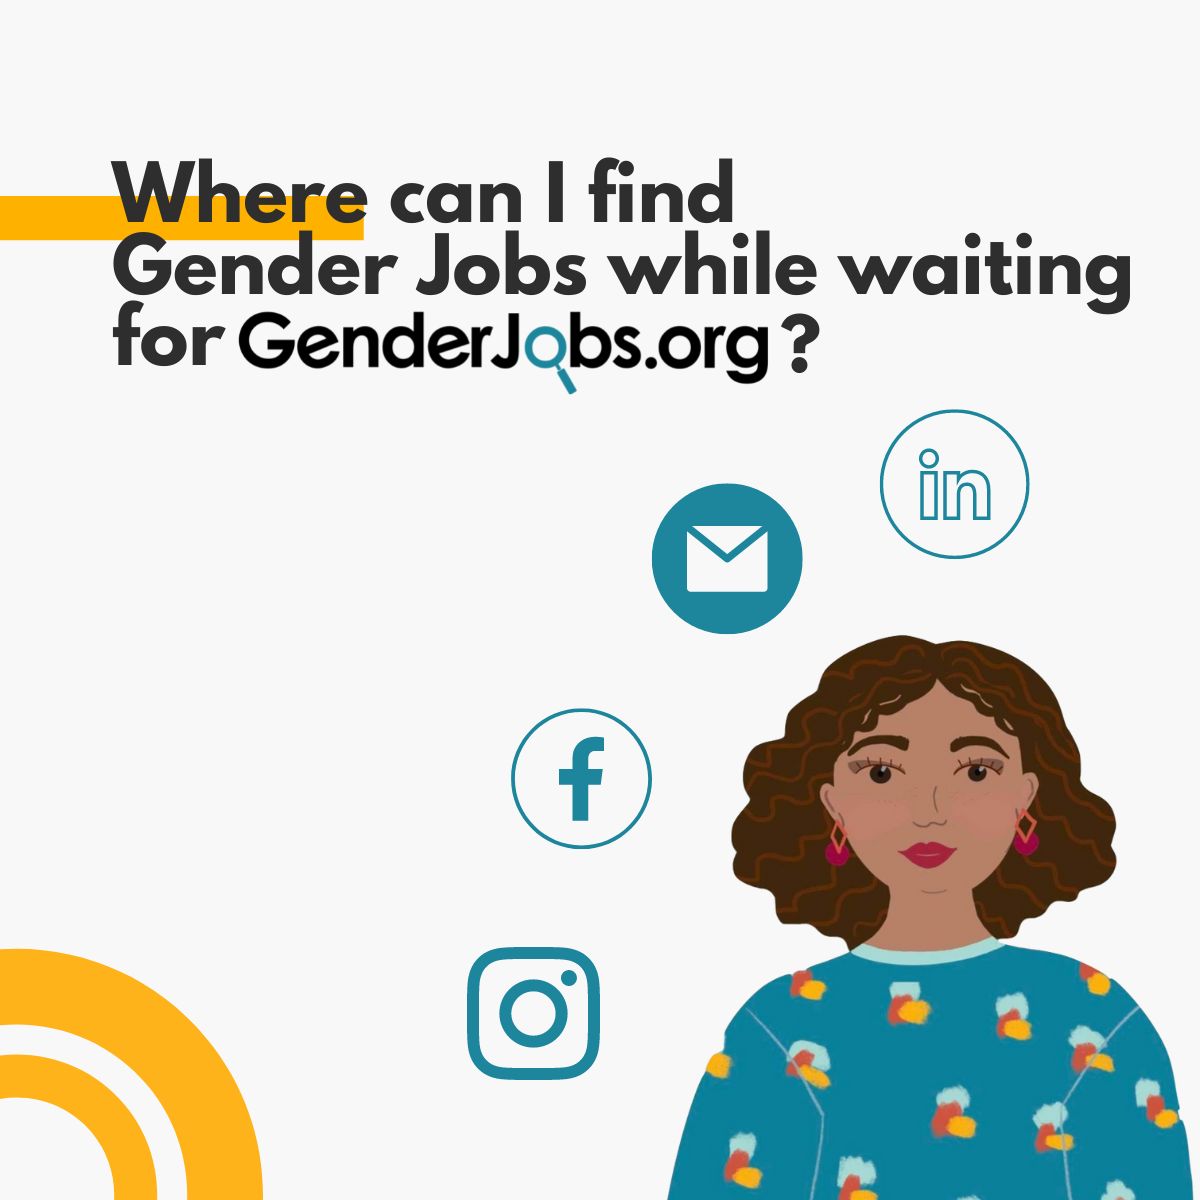 📌 Following our brand NEW Instagram page 🌻 

📌 Subscribing to the free weekly #GenderJobs Newsletter 📩 

📌 Following our Facebook page 🧜‍♀️ 

📌 Following the weekly #GenderJobsBoard on LinkedIn 🎁

🔗All relevant links are here: 
linktr.ee/genderjobs.org